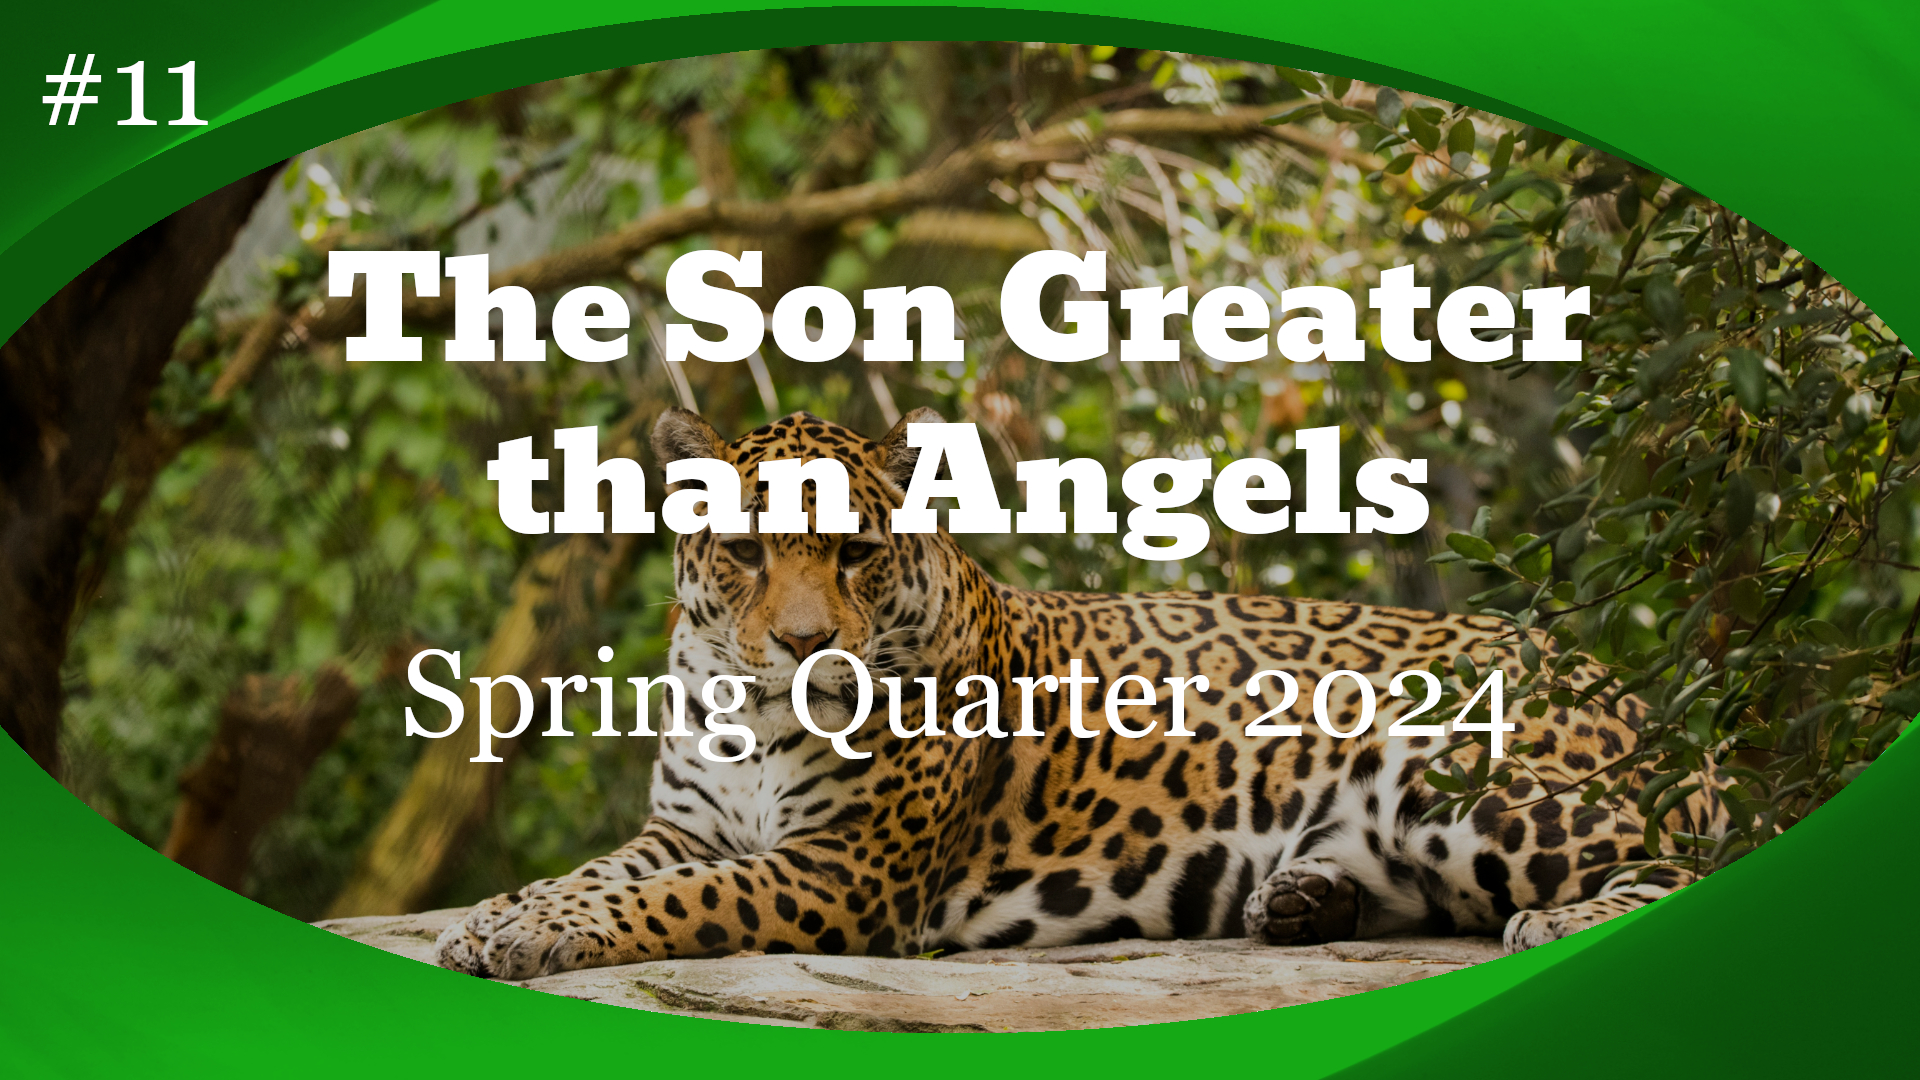 The Son Greater than Angels